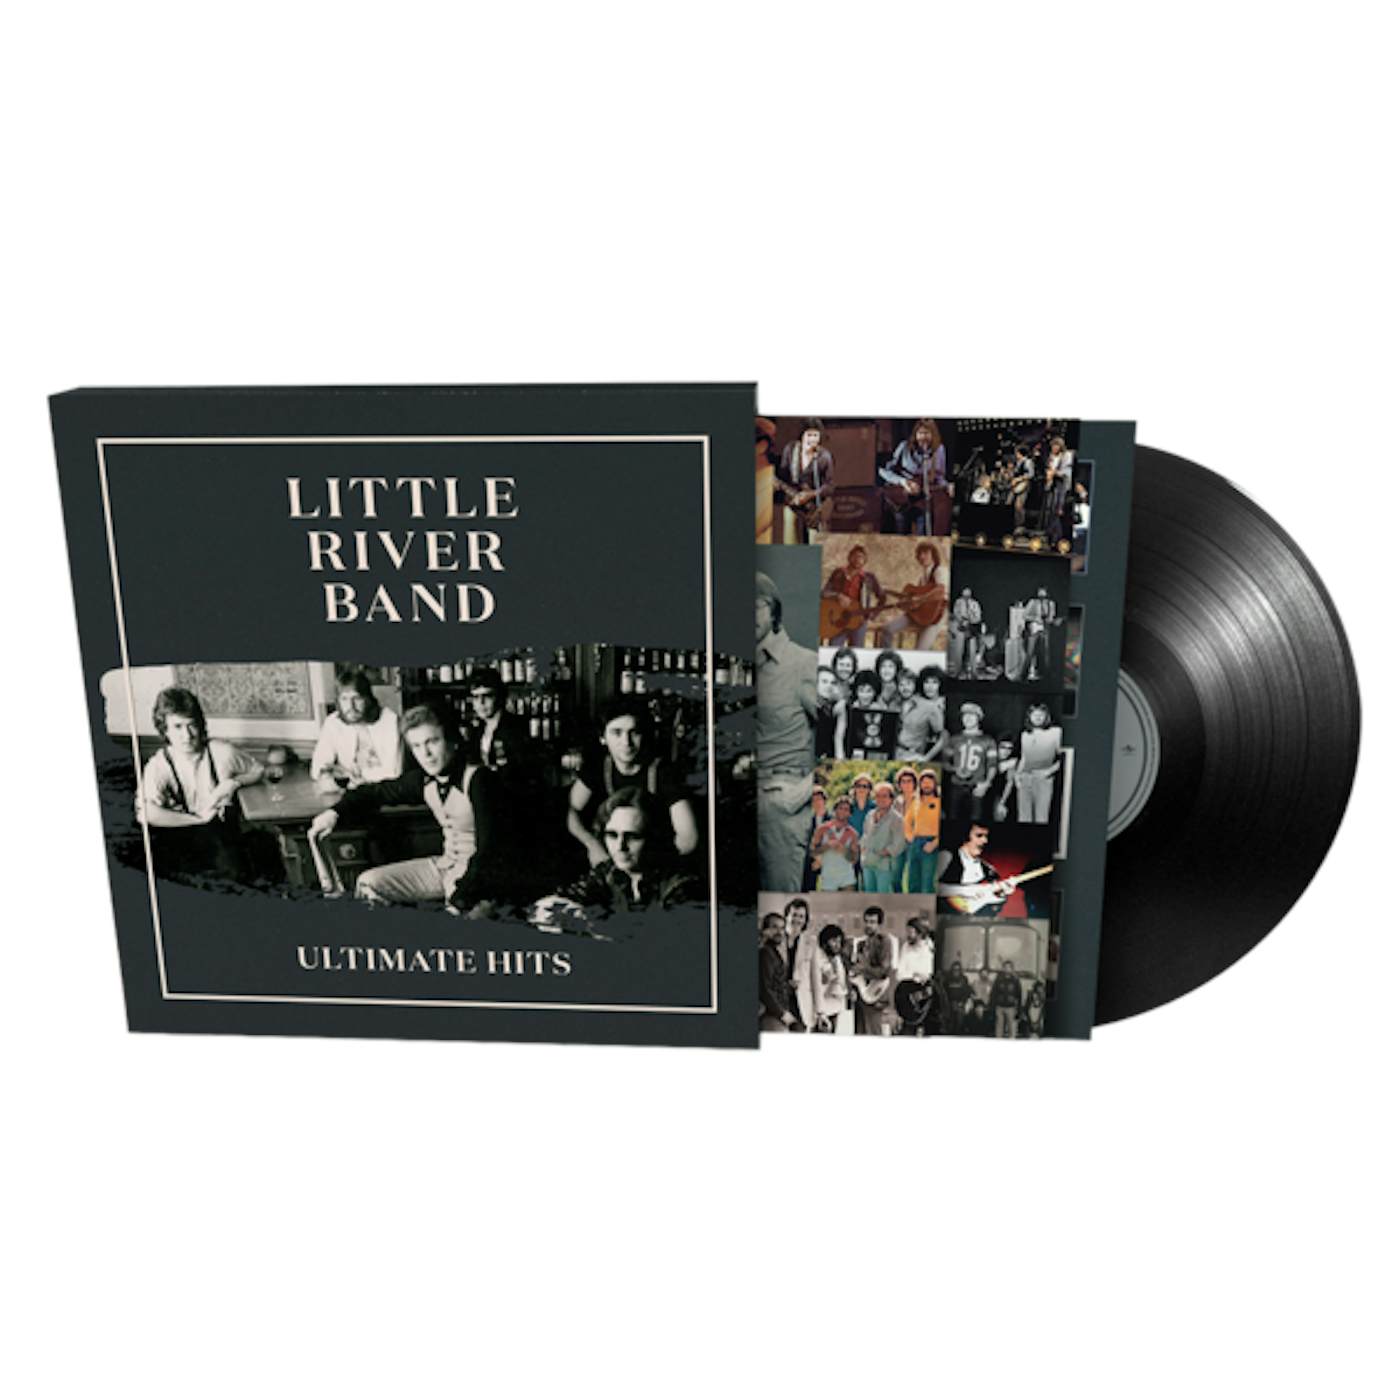 Little River Band Ultimate Hits Vinyl Record